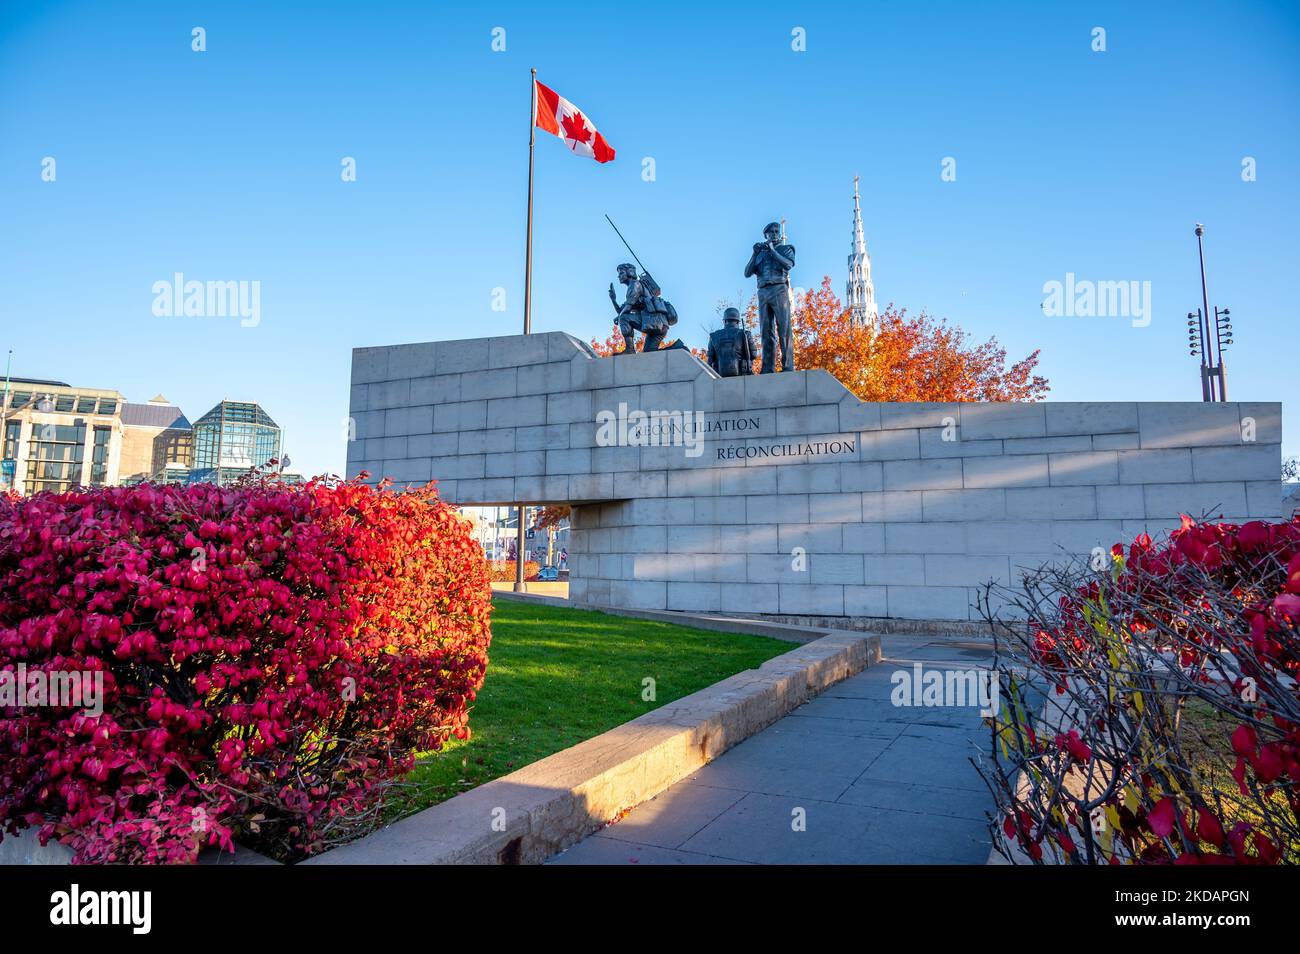 Ottawa, Ontario - October 19, 2022:  Reconciliation: The Peacekeeping Monument in the national capital region of Ottawa. Stock Photo